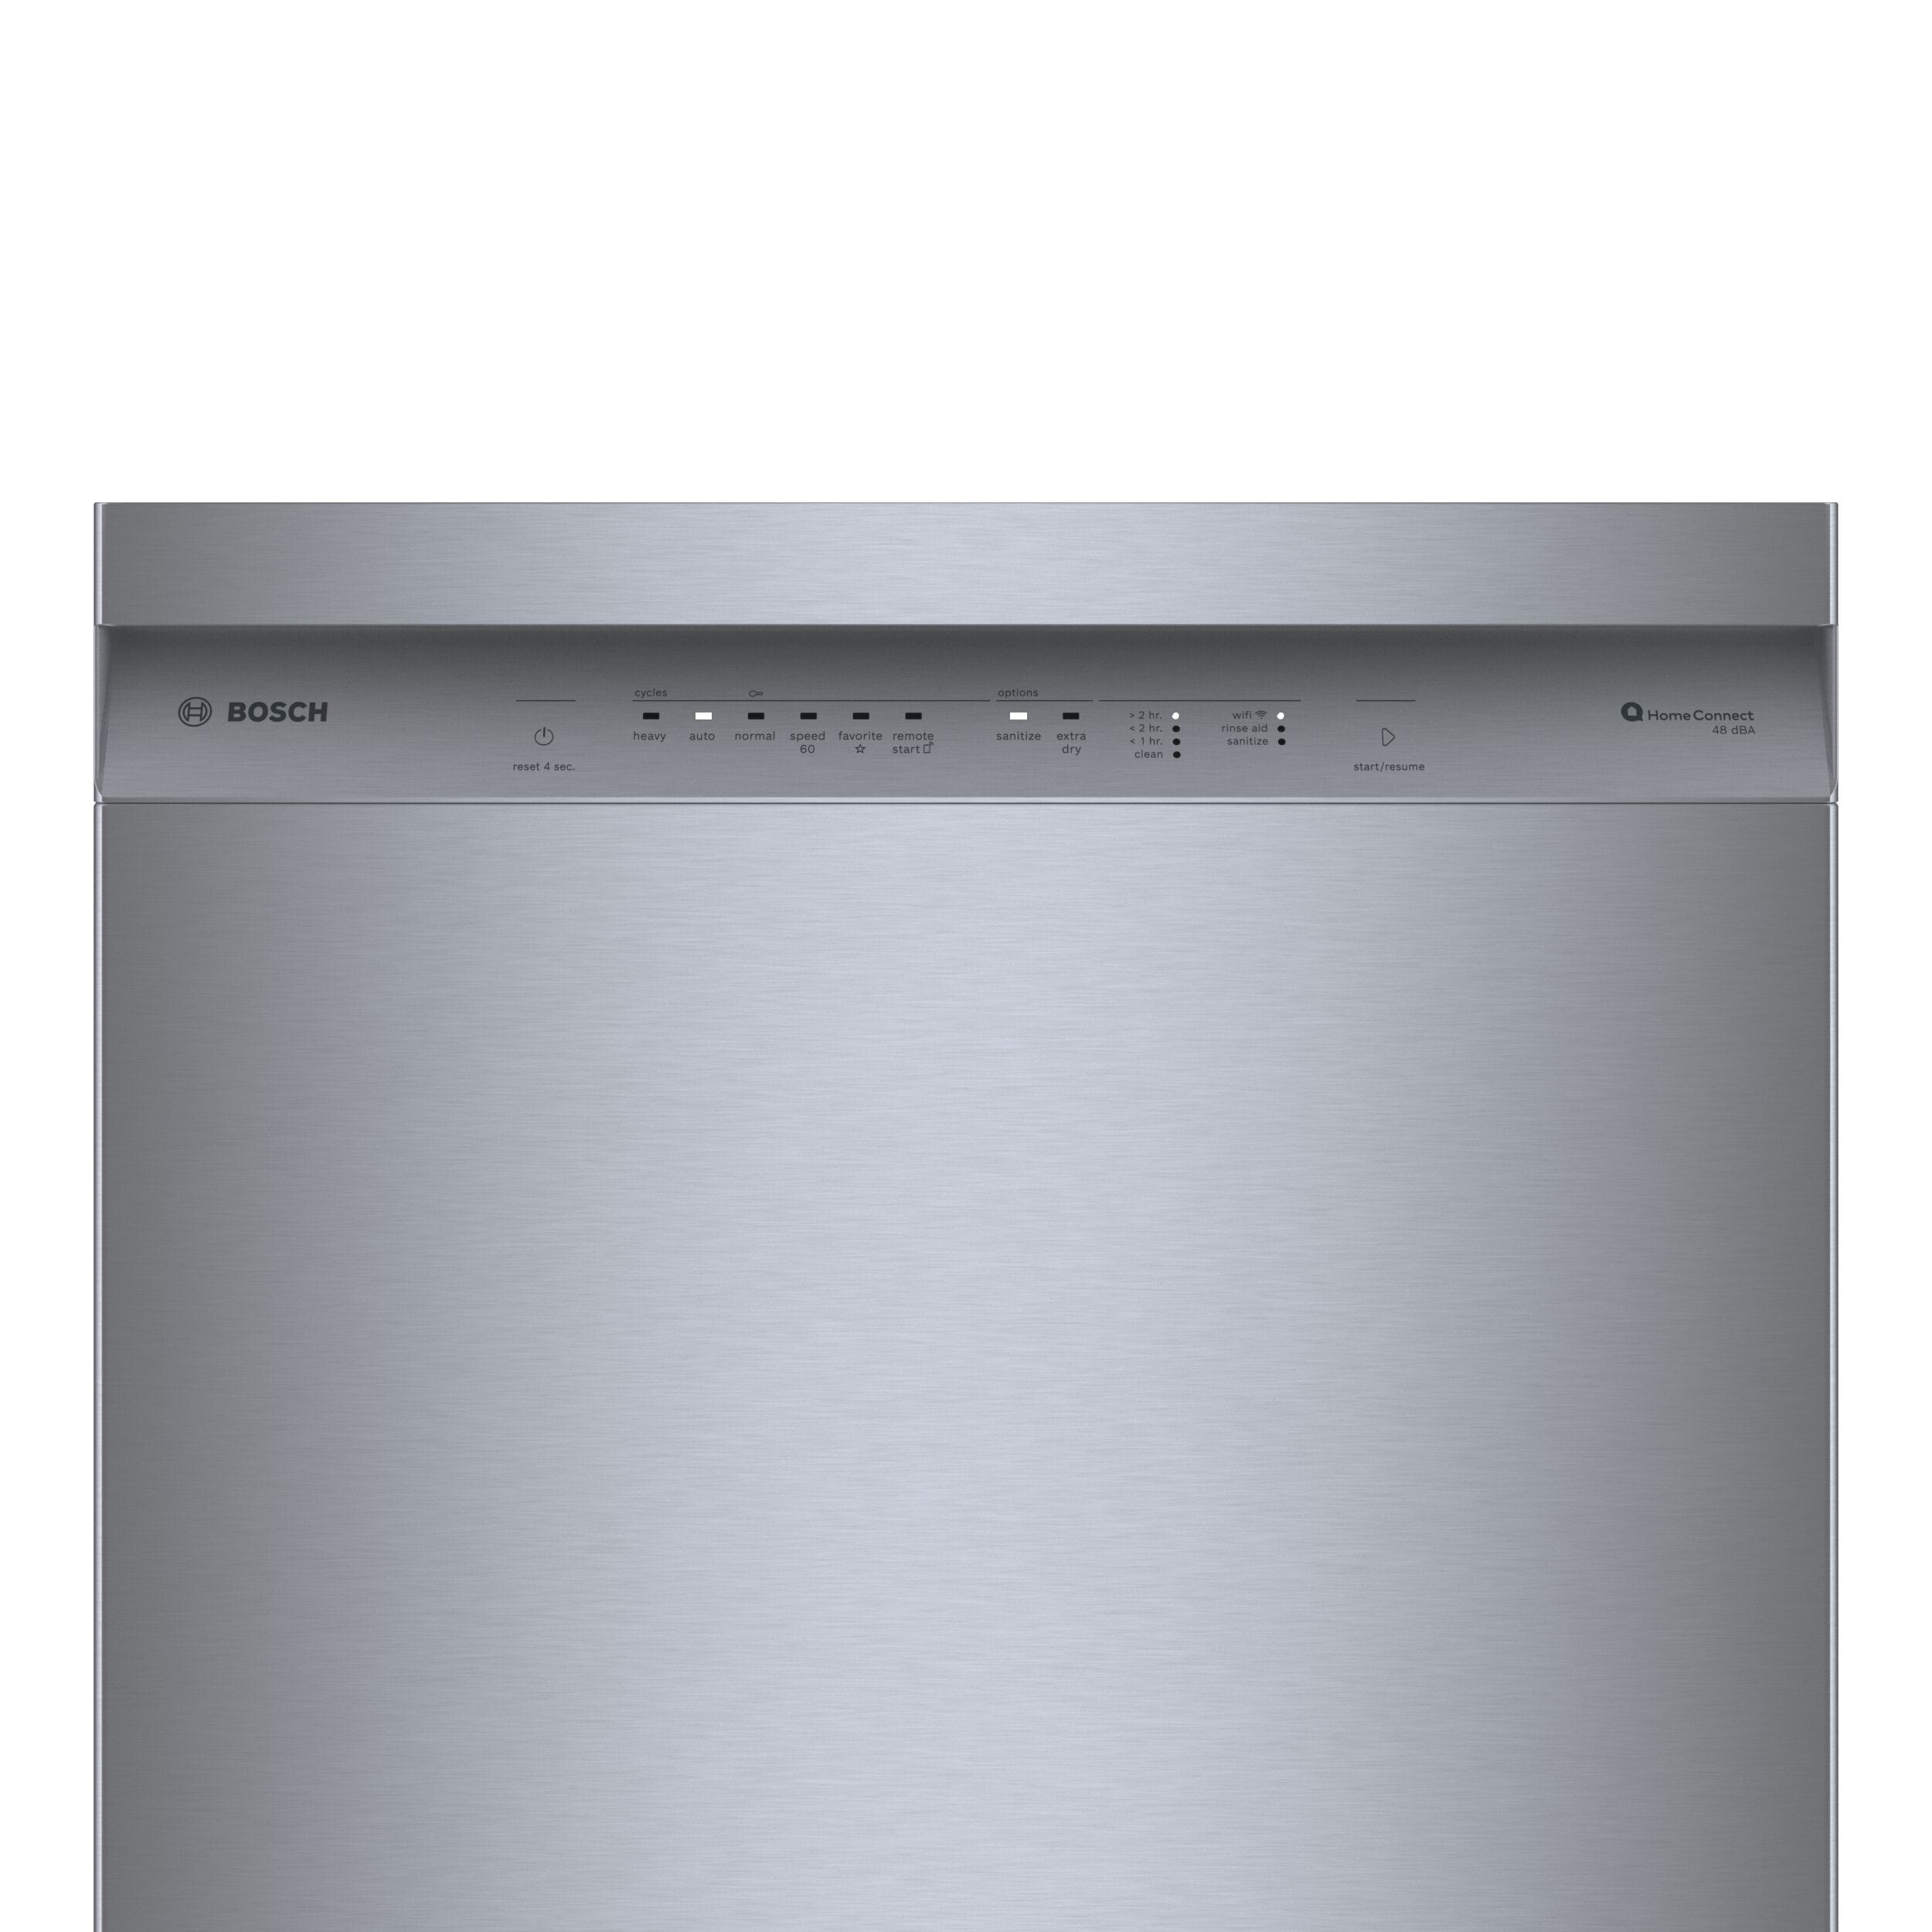 Bosch 100 Series Front Control 24-in Smart Built-In Dishwasher (White),  50-dBA